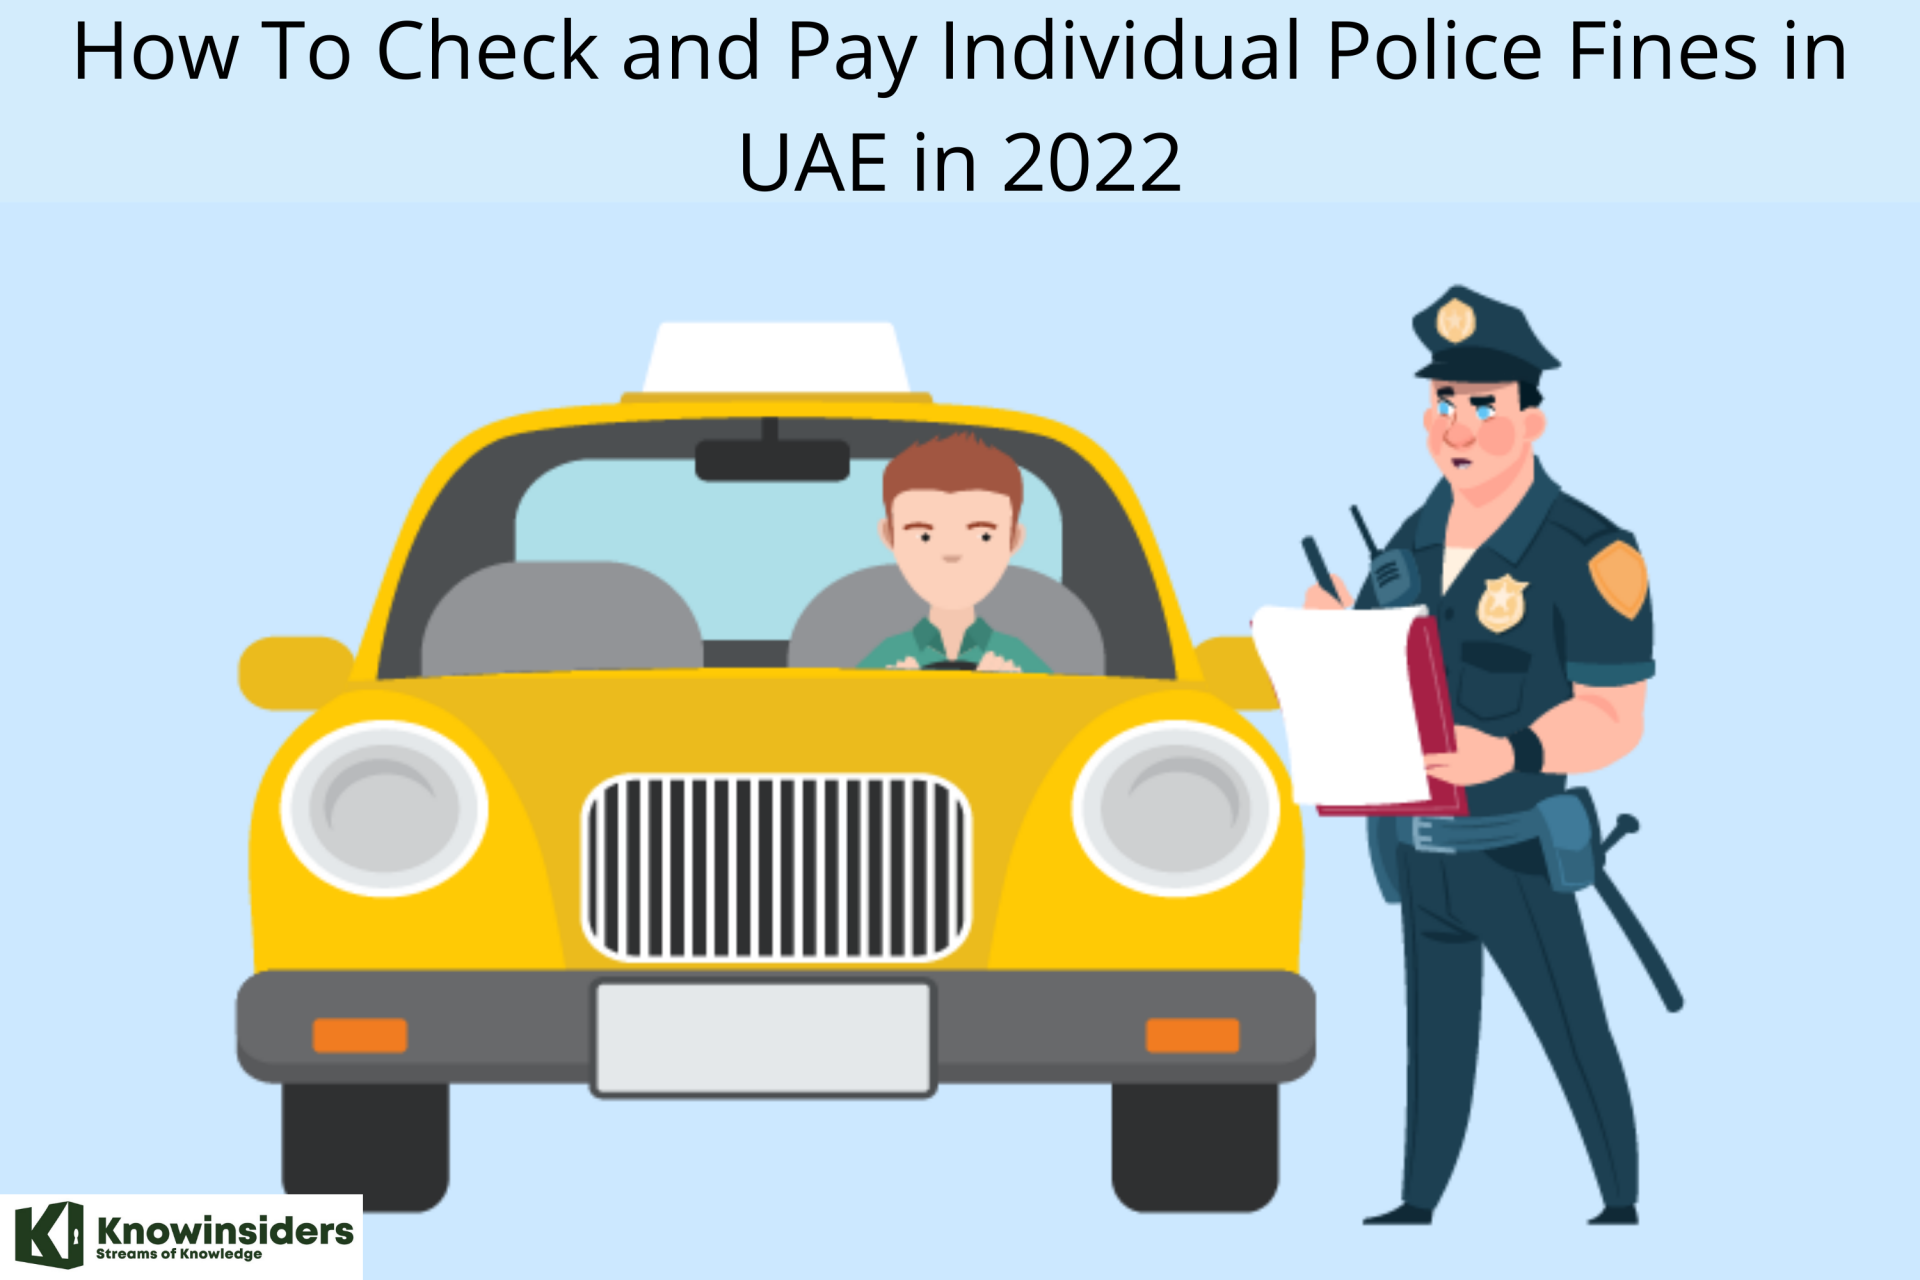 How To Check and Pay Traffic Fines Online in UAE